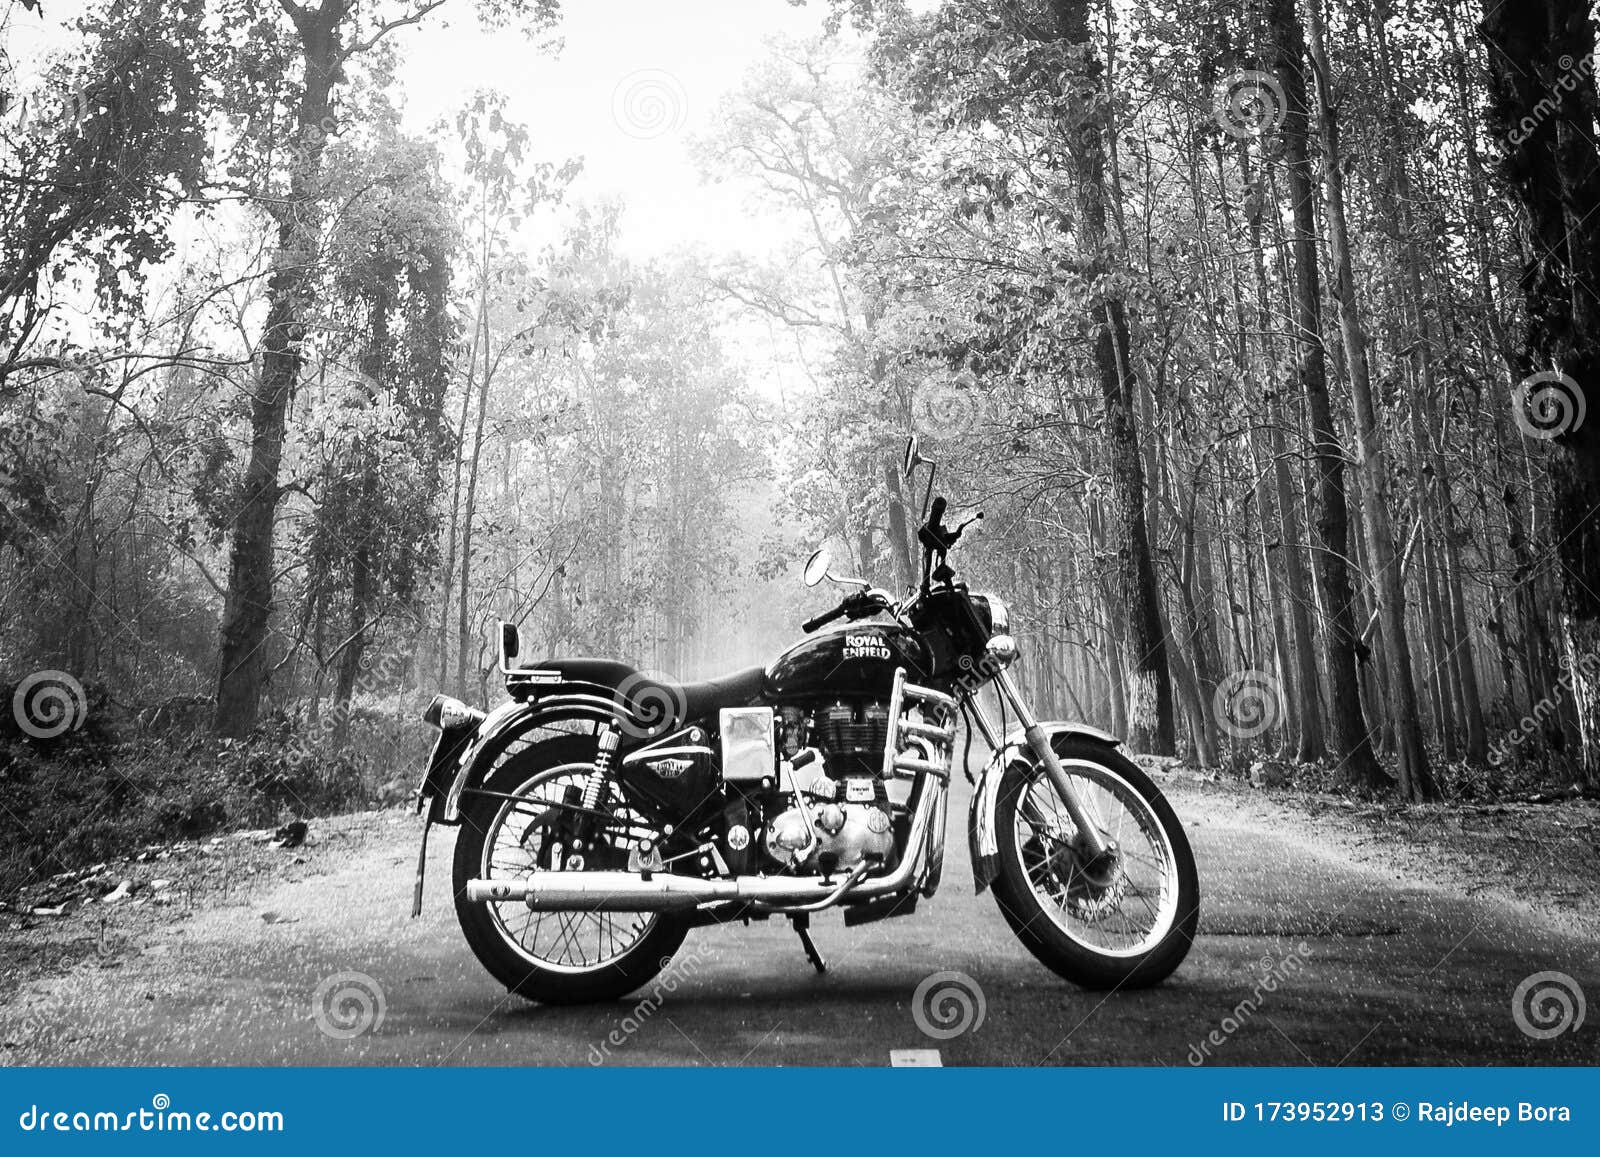 Royal Enfield Solo Rider - the Best Standing Editorial Stock Photo - Image  of bull, lone: 173952913